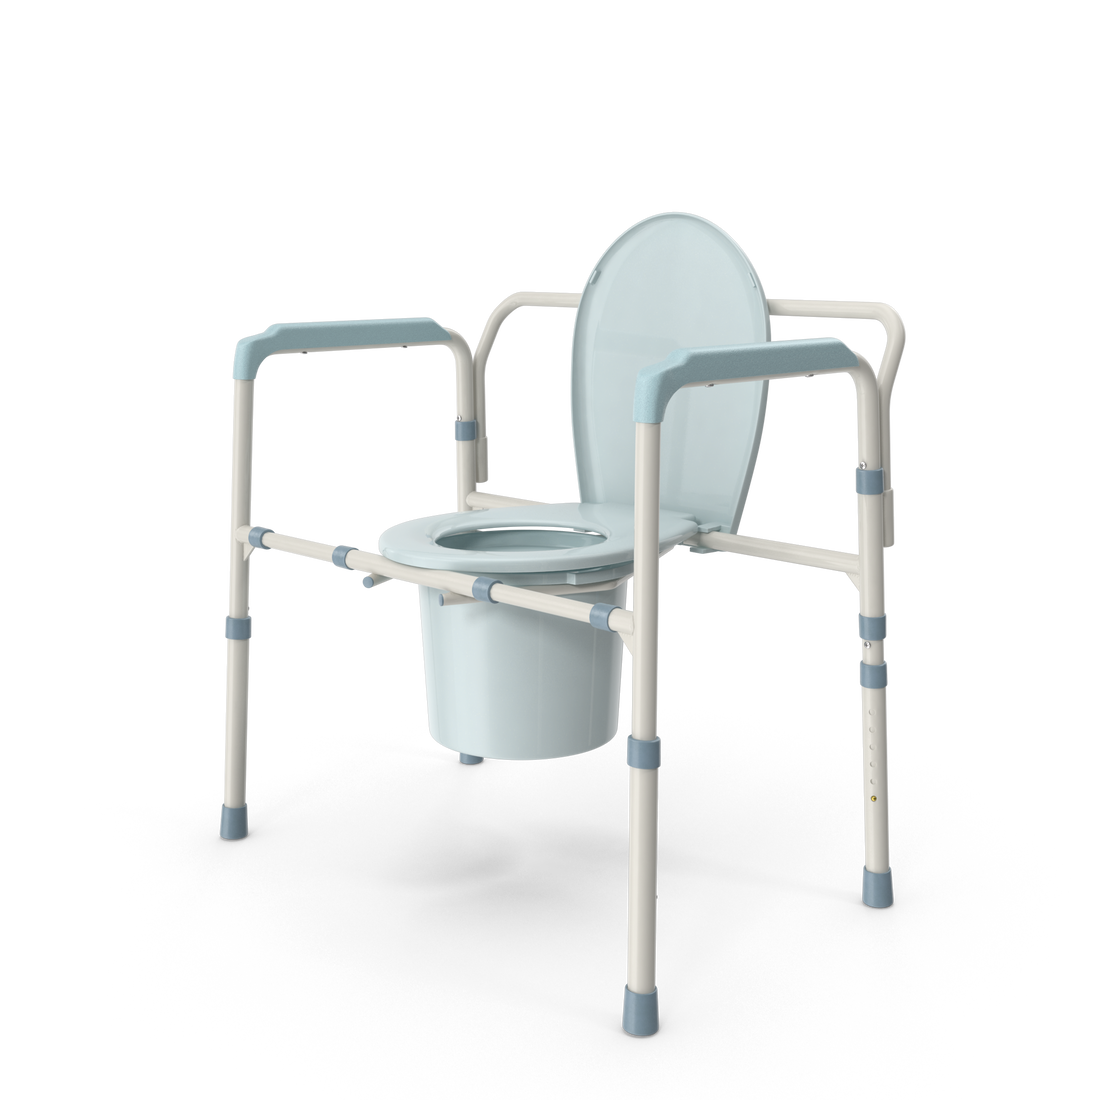 Discover the Top 5 Advantages of Buying a Commode Chair Online: Convenience, Variety, Information, Pricing, and Delivery!